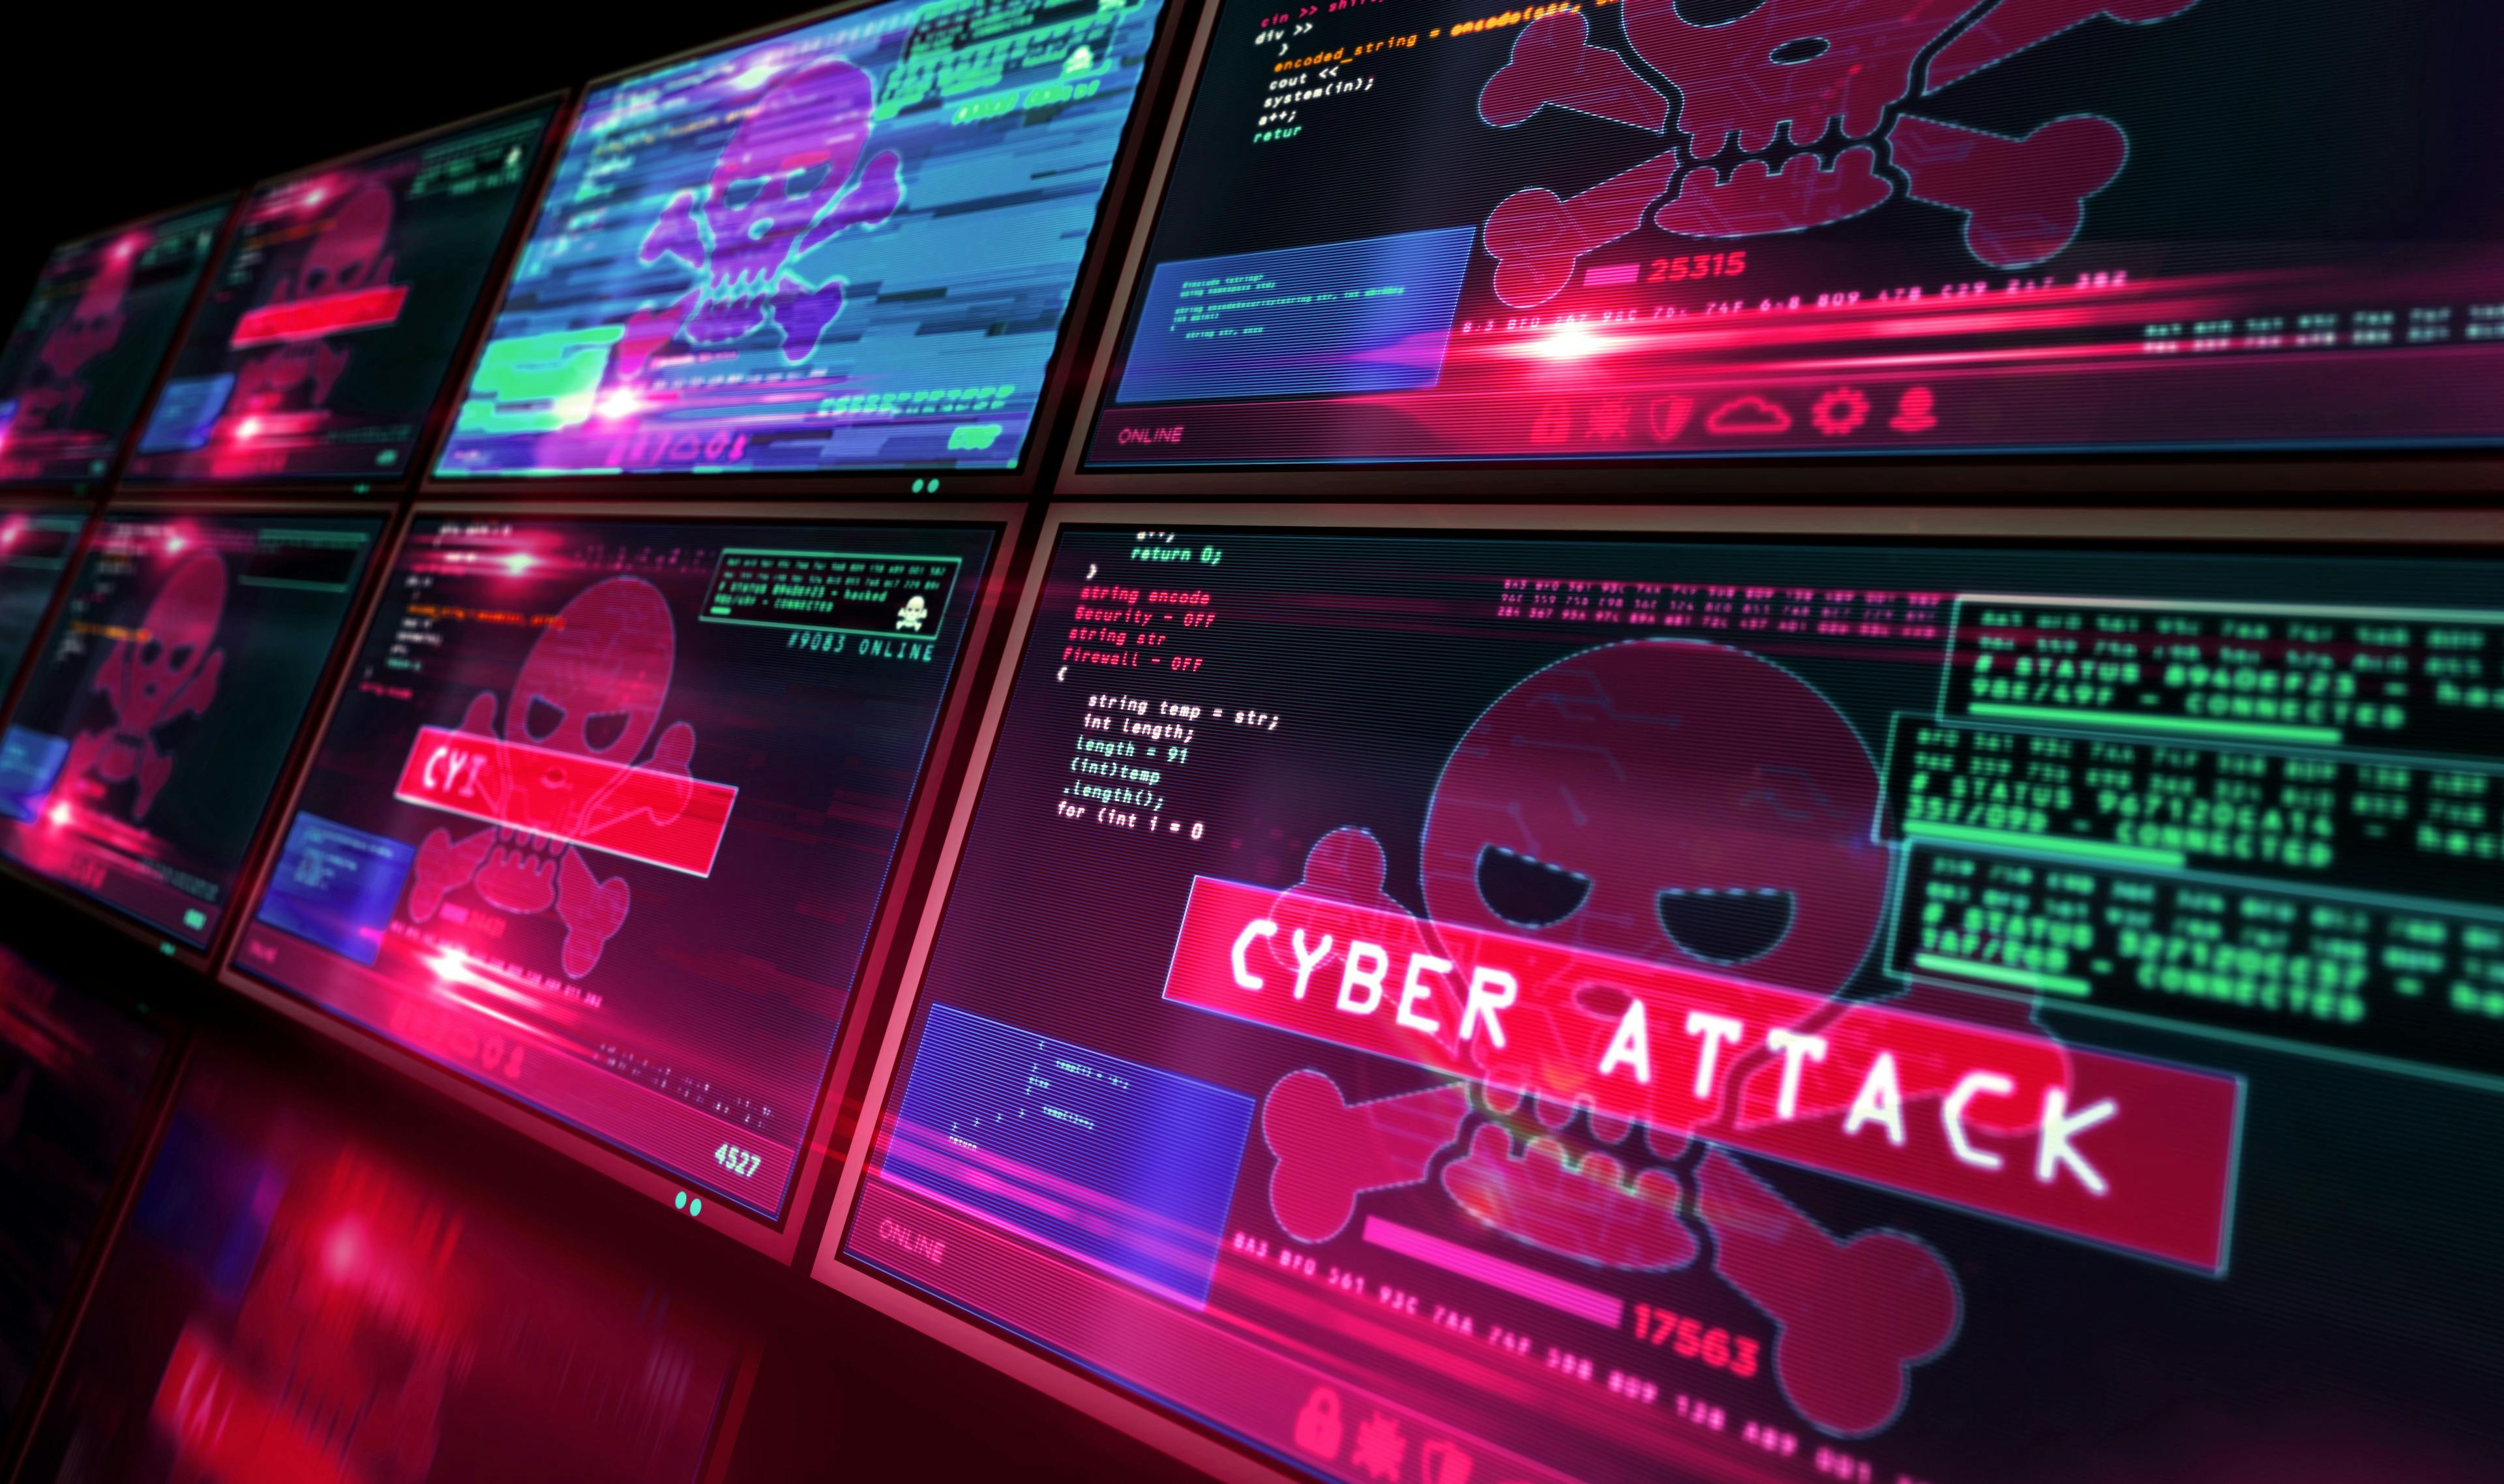 How outpatient clinics can minimize cyber security risks